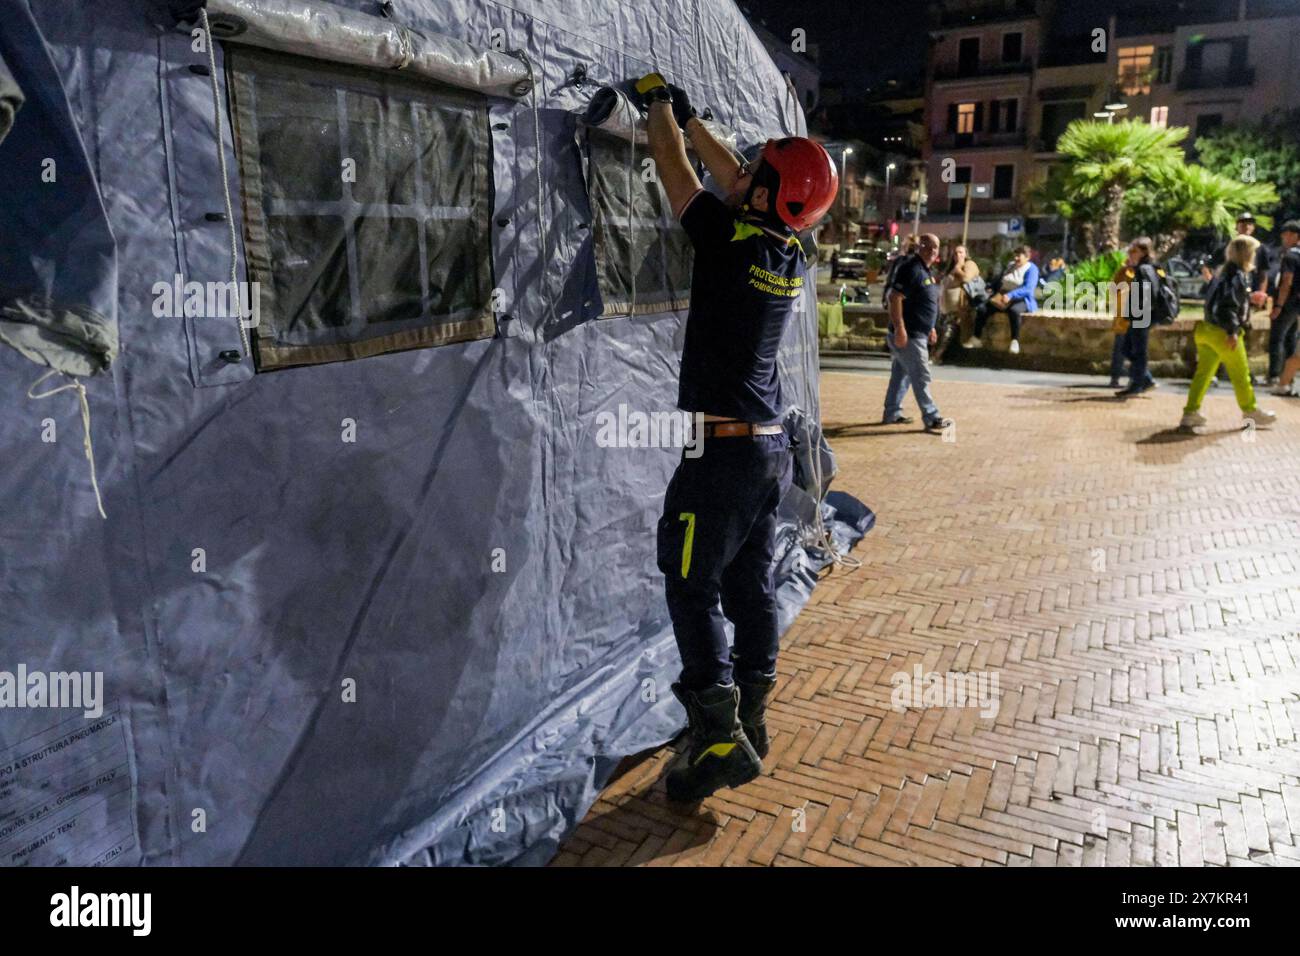 Italy: Campi Flegrei, bradisismo Campania s civil protection set up a tensile structure at the port of pozzuoli for people who are not confident about returning to their homes after the earthquake tremors, near Naples, southern Italy, 20 May 2024. The tremor that occurred at 8.10pm with epicentre in the Campi Flegrei was of magnitude 4.4. This was reported by the National Institute of Geophysics and Volcanology, according to which the depth of the quake was three kilometres. ABP01923 Copyright: xAntonioxBalascox Stock Photo